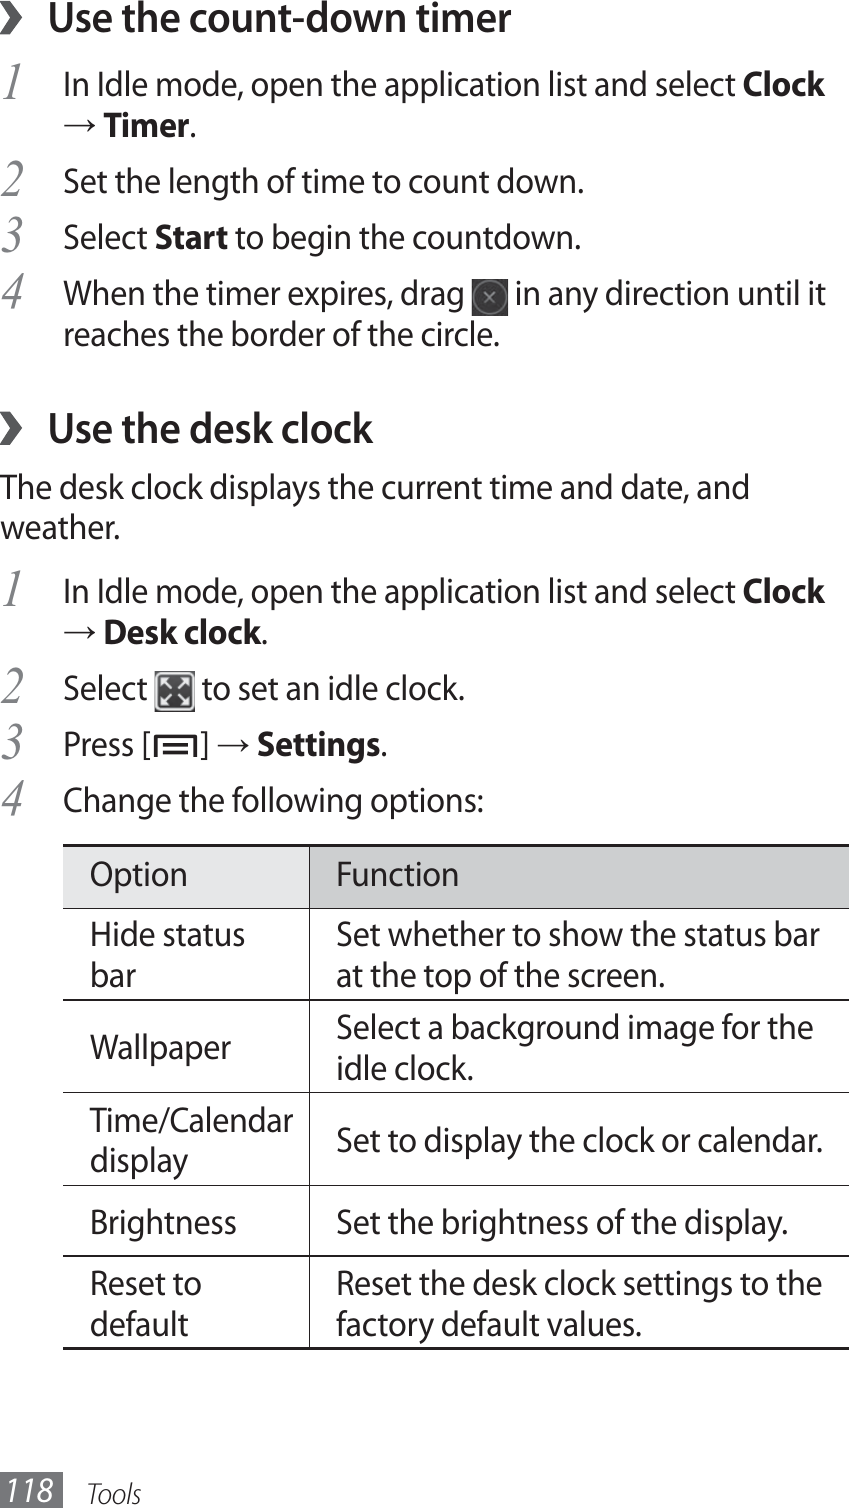 Tools118Use the count-down timer ›In Idle mode, open the application list and select 1 Clock → Timer.Set the length of time to count down.2 Select 3 Start to begin the countdown.When the timer expires, drag 4  in any direction until it reaches the border of the circle.Use the desk clock ›The desk clock displays the current time and date, and weather.In Idle mode, open the application list and select 1 Clock → Desk clock.Select 2  to set an idle clock.Press [3 ] → Settings. Change the following options:4 Option FunctionHide status barSet whether to show the status bar at the top of the screen.Wallpaper Select a background image for the idle clock.Time/Calendar display Set to display the clock or calendar.Brightness Set the brightness of the display.Reset to defaultReset the desk clock settings to the factory default values.